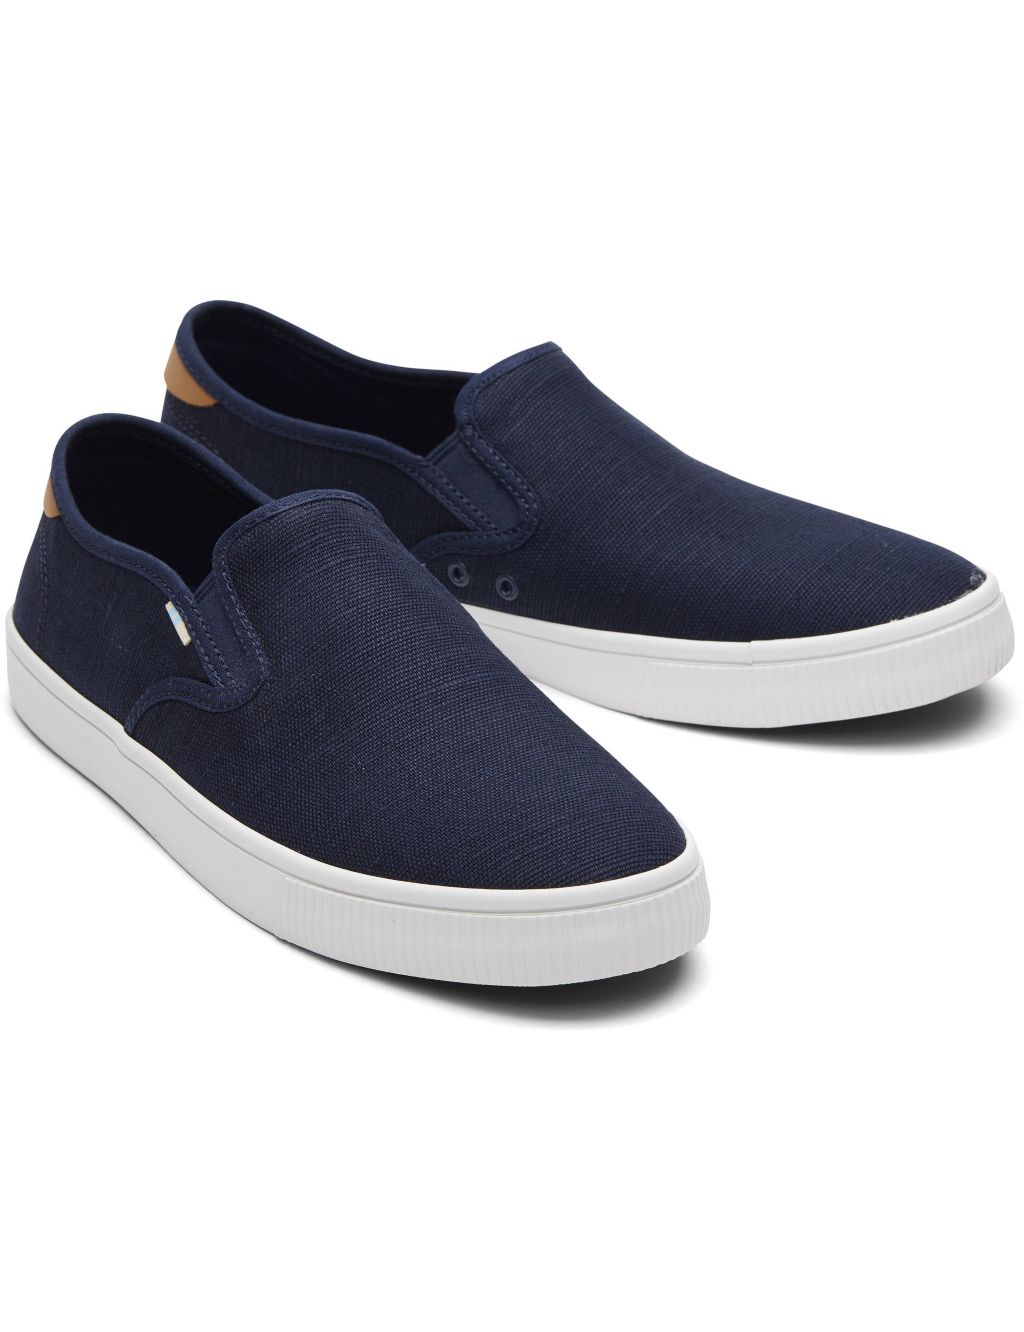 Canvas Slip-On Trainers image 2